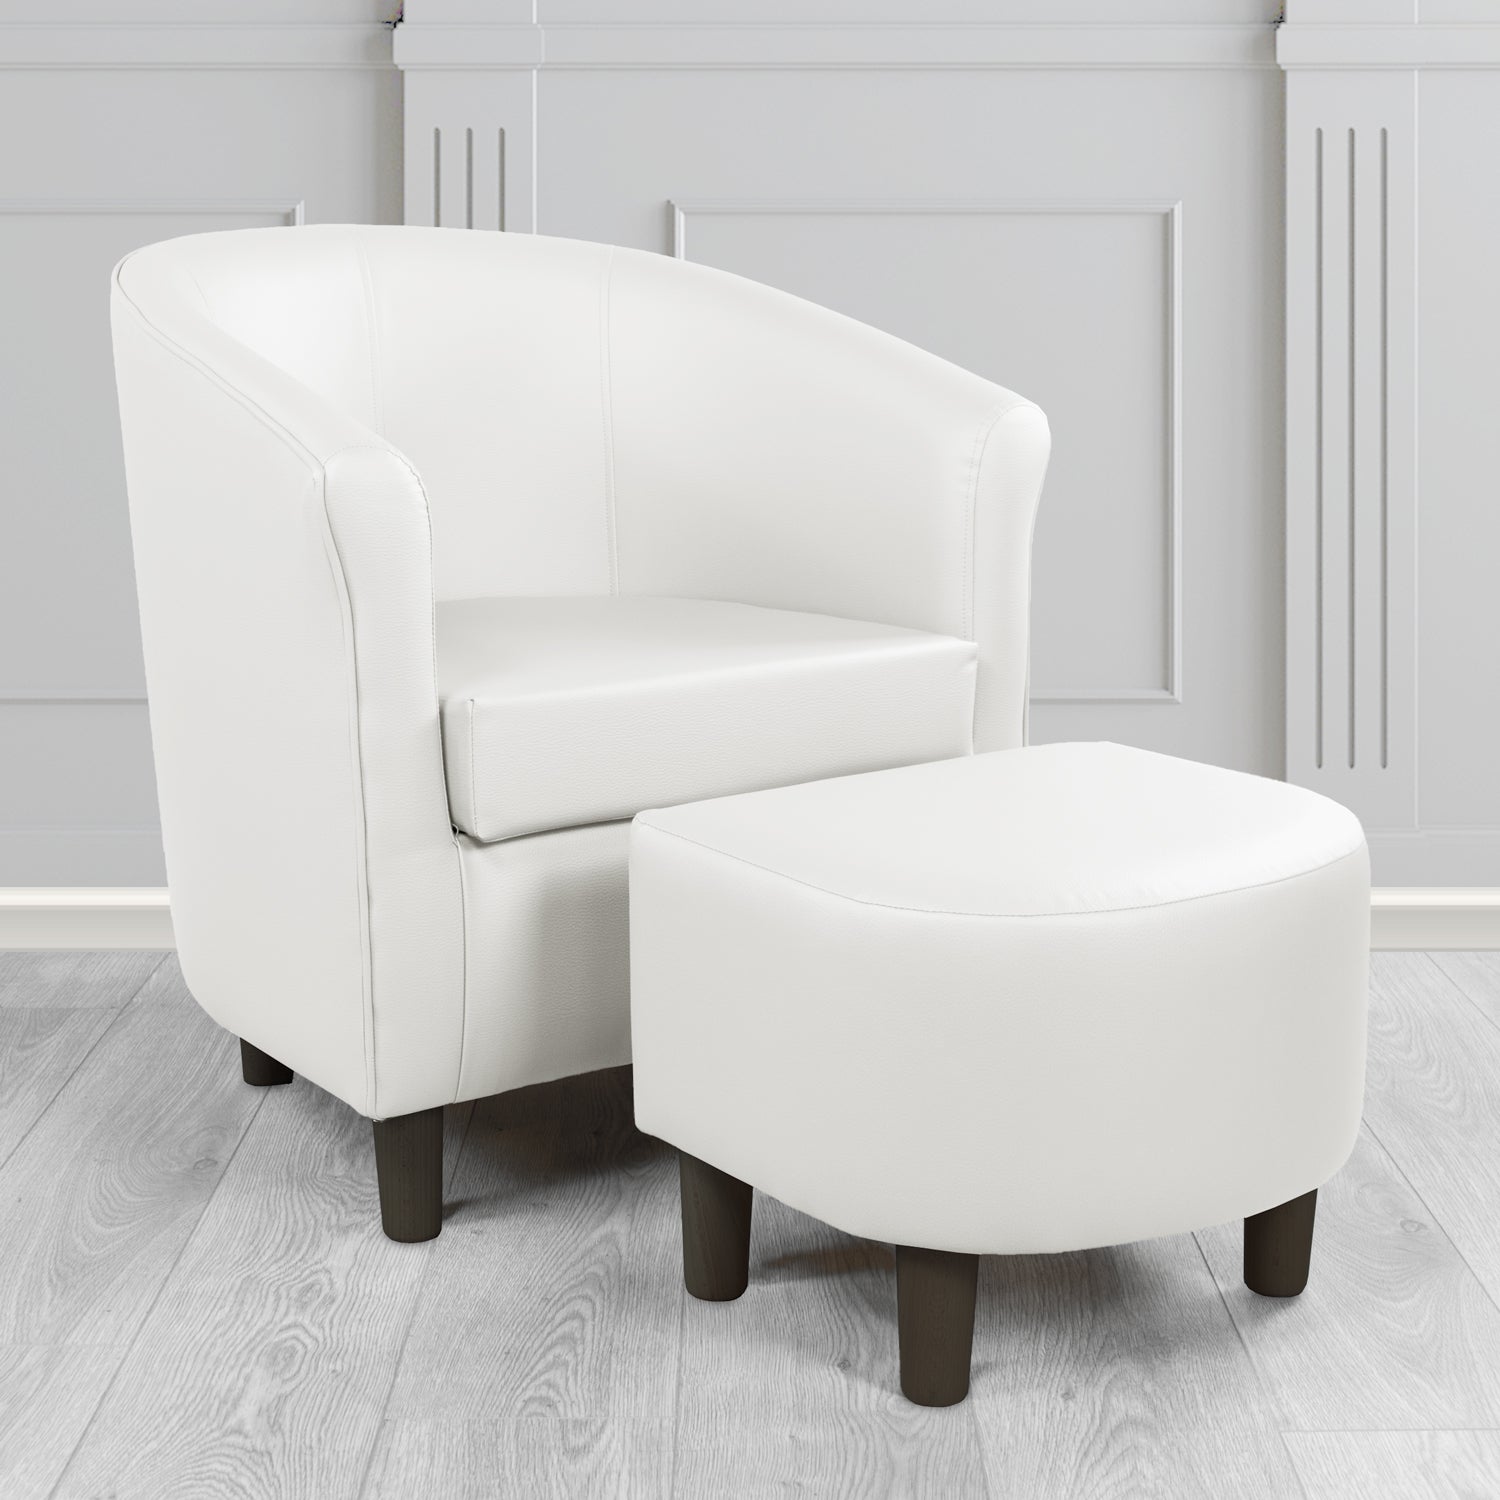 Tuscany Tub Chair with Footstool Set in Madrid White Faux Leather